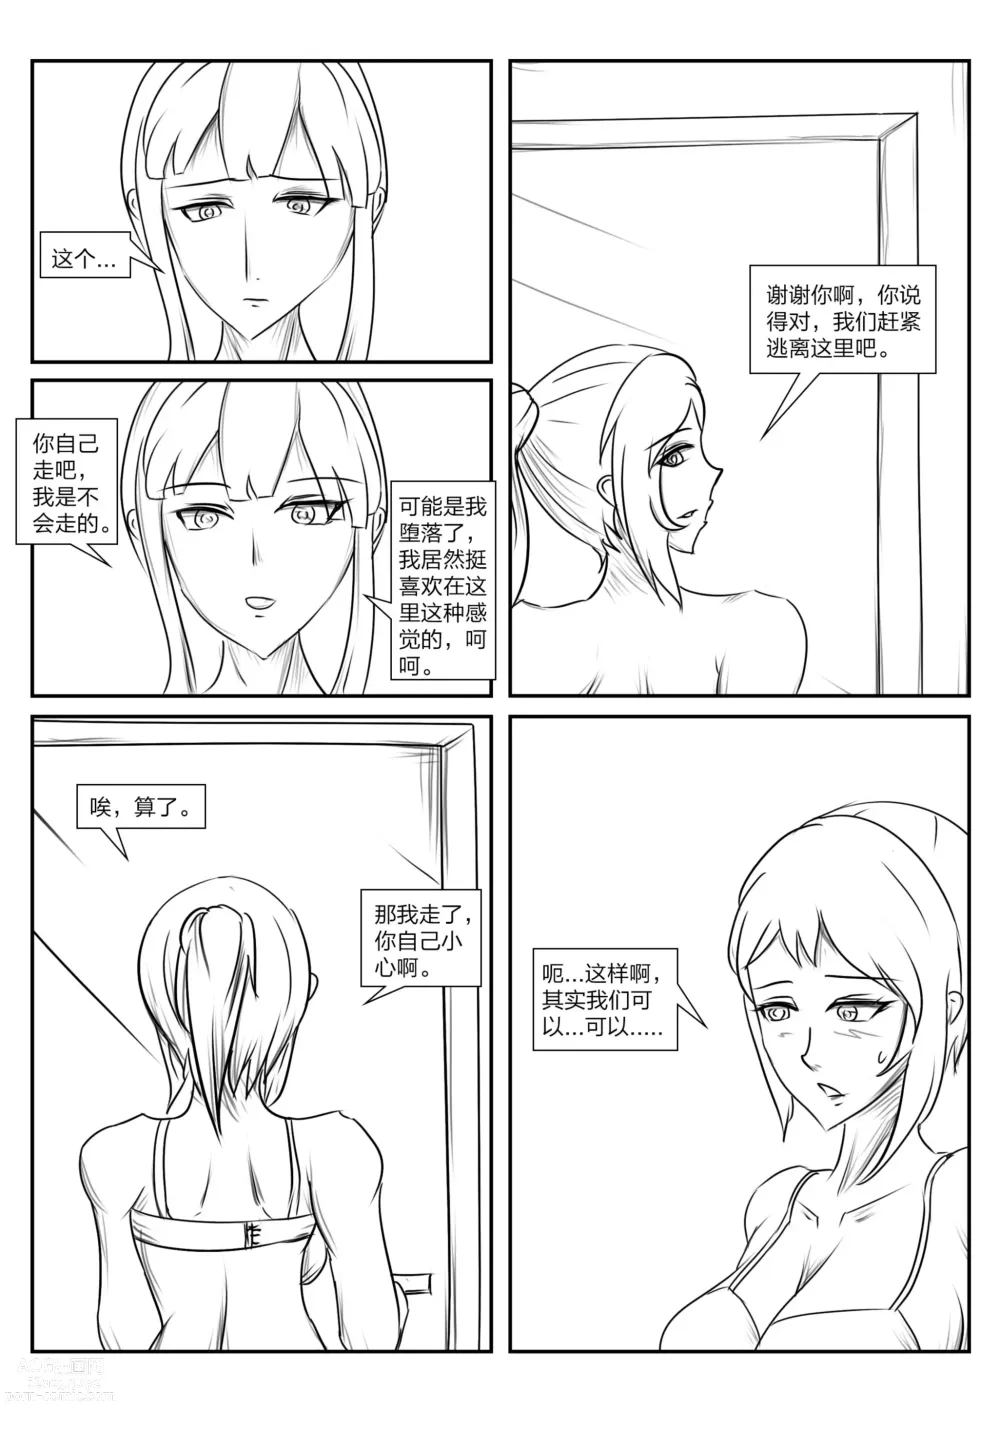 Page 48 of doujinshi The crisis in public self bondage